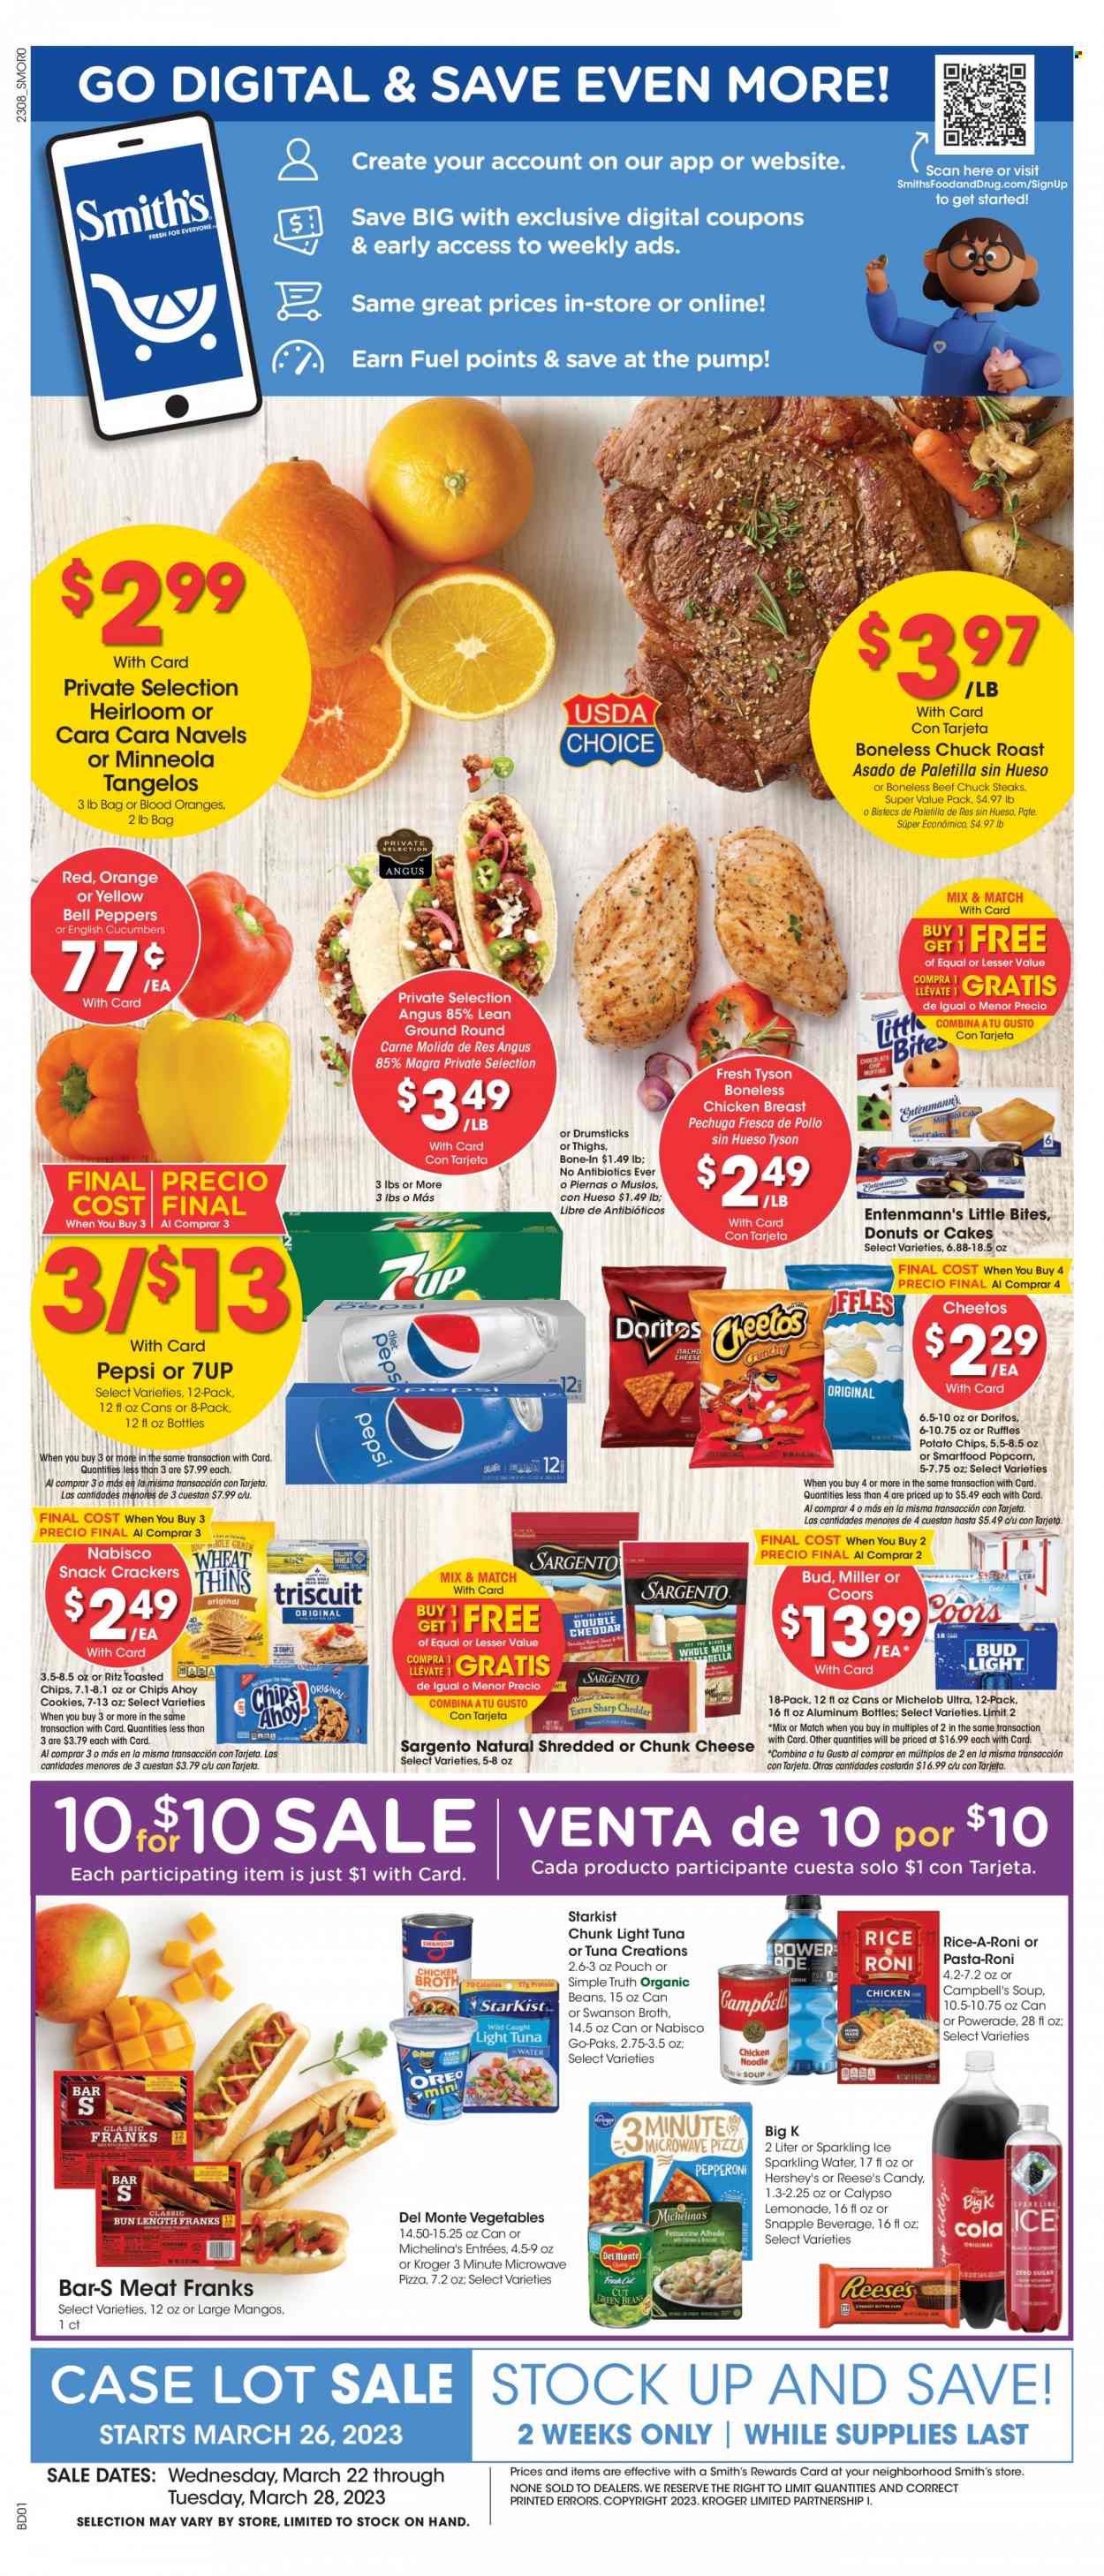 thumbnail - Smith's Flyer - 03/22/2023 - 03/28/2023 - Sales products - cake, donut, Entenmann's, bell peppers, cucumber, peppers, tangelos, oranges, tuna, StarKist, Campbell's, pizza, soup, roast, chunk cheese, Sargento, Reese's, Hershey's, cookies, snack, crackers, Little Bites, RITZ, Doritos, potato chips, Cheetos, chips, Smartfood, Smith's, popcorn, broth, light tuna, Del Monte, rice, lemonade, Powerade, Pepsi, 7UP, Snapple, sparkling water, water, beer, Miller, chicken breasts, chicken, beef meat, steak, chuck roast, Coors, Michelob, navel oranges. Page 1.